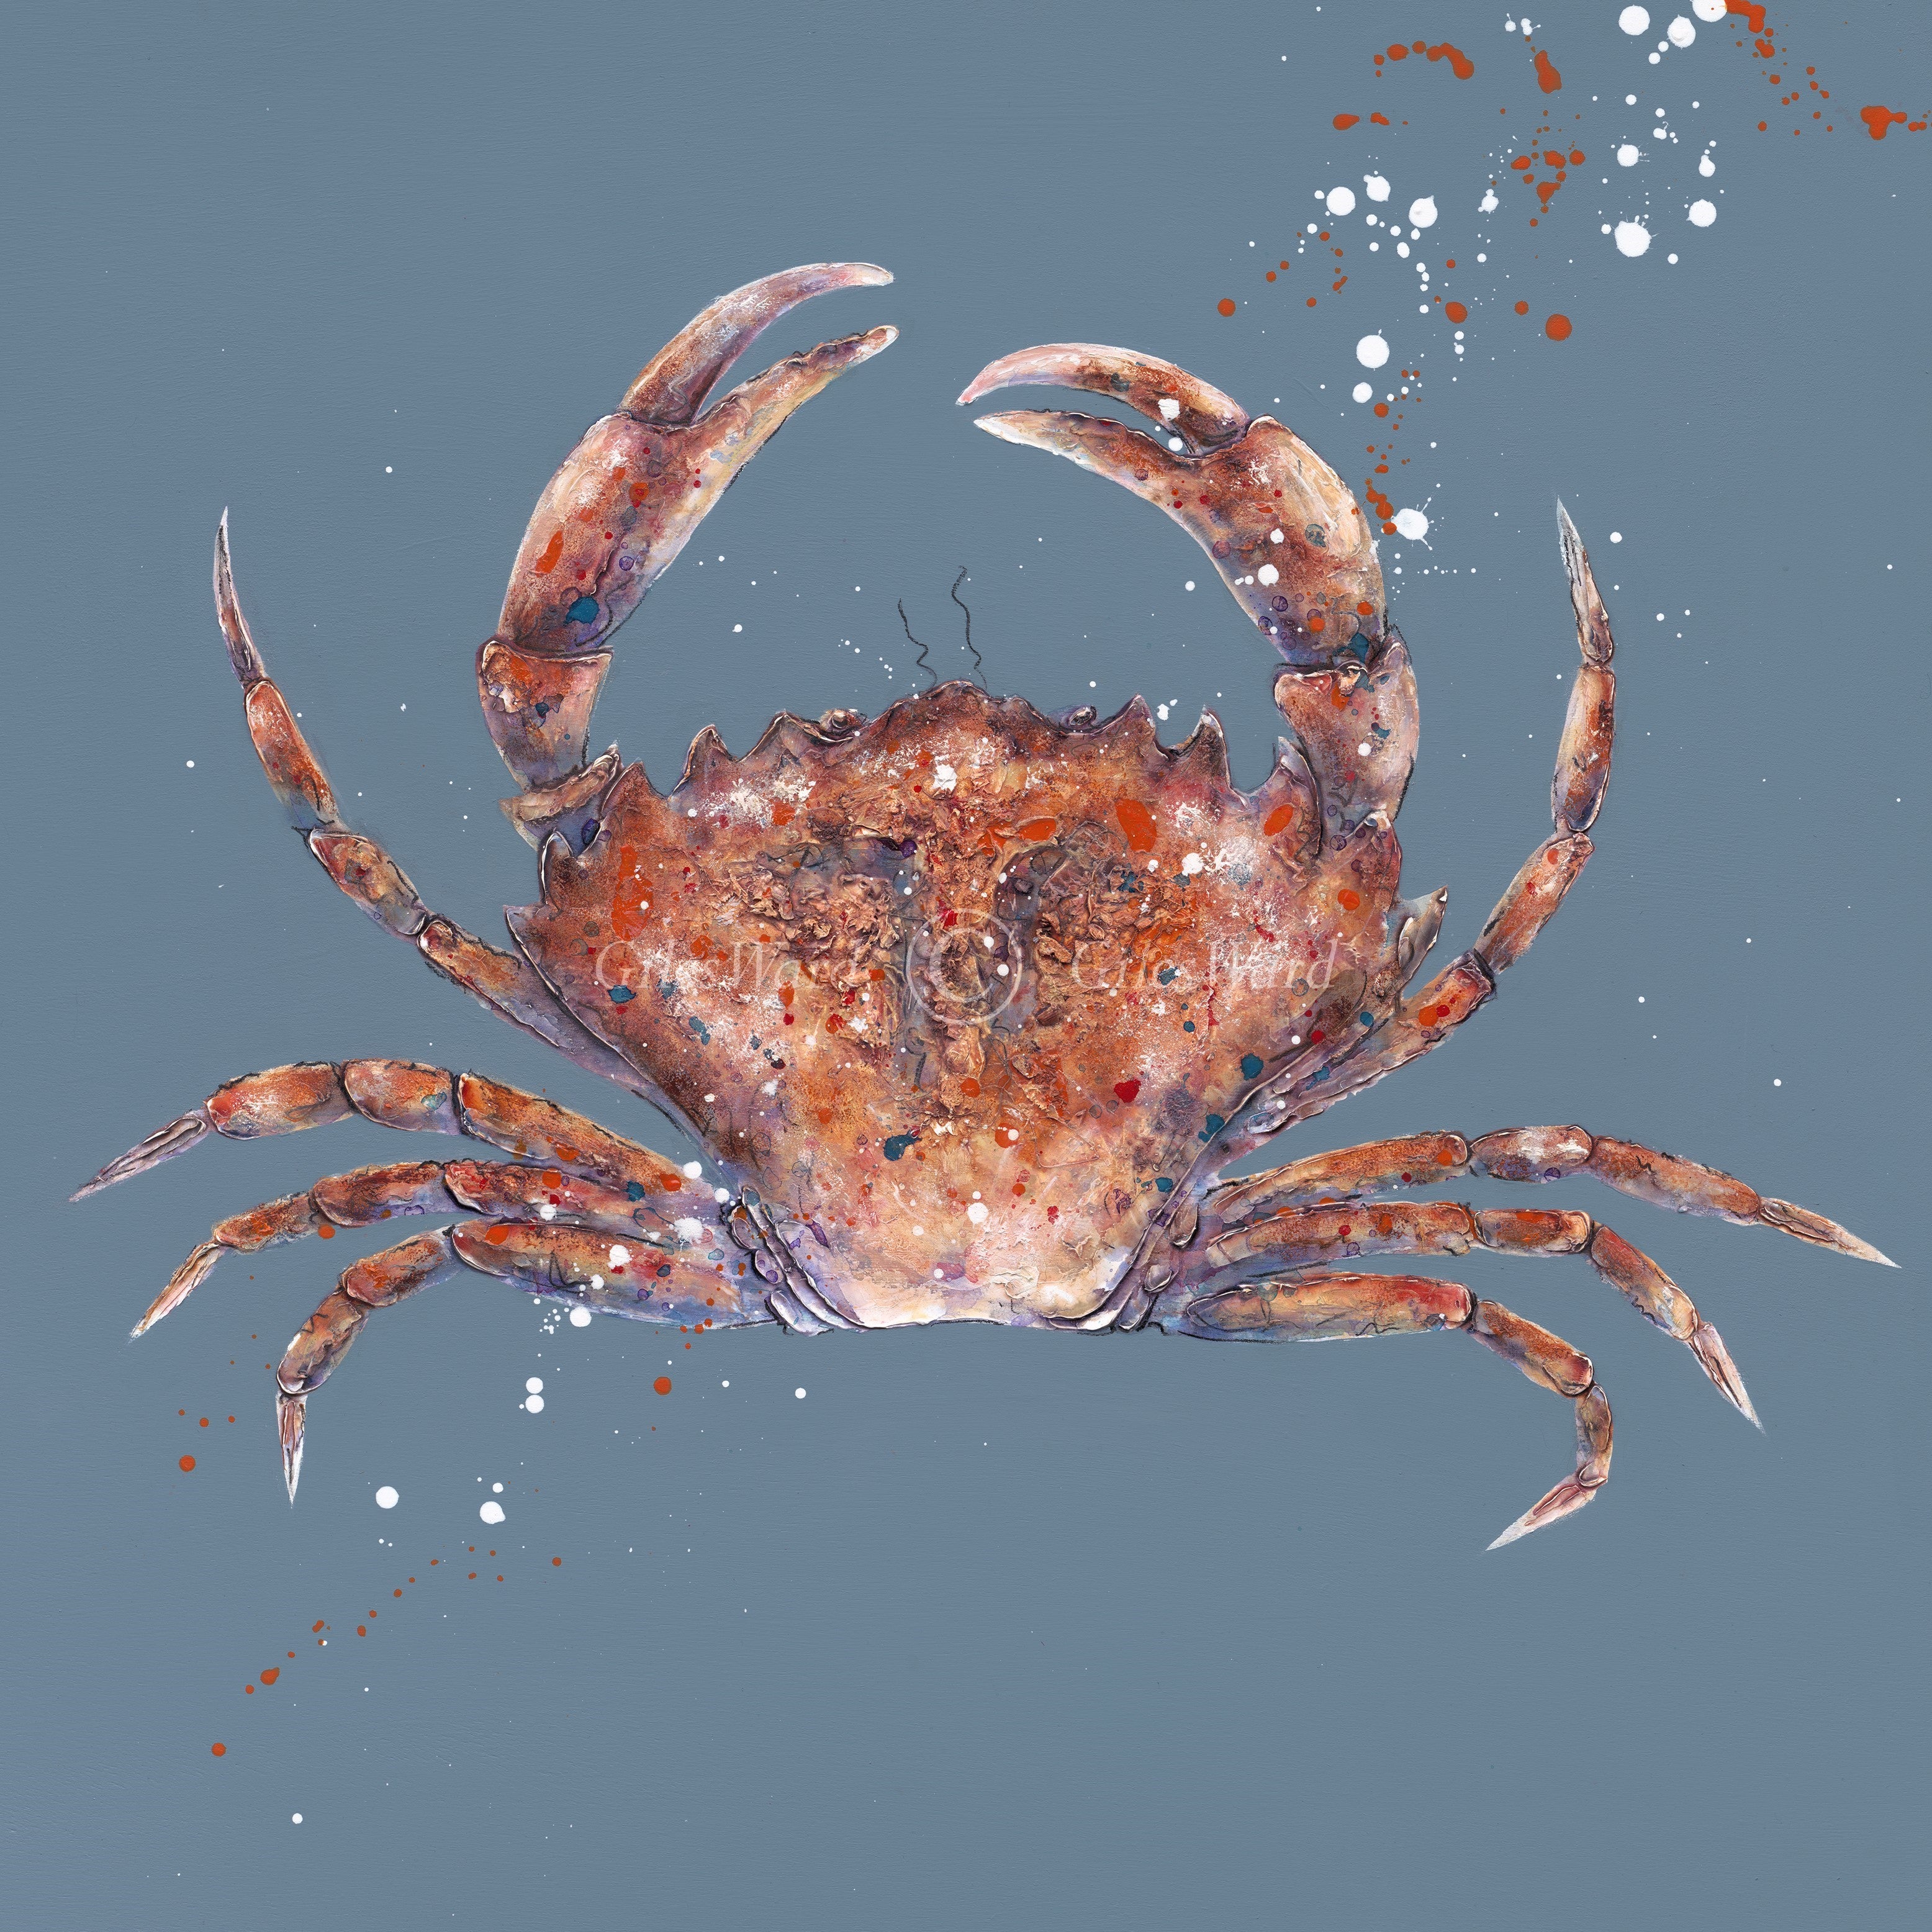 Red Crab by artist Giles Ward